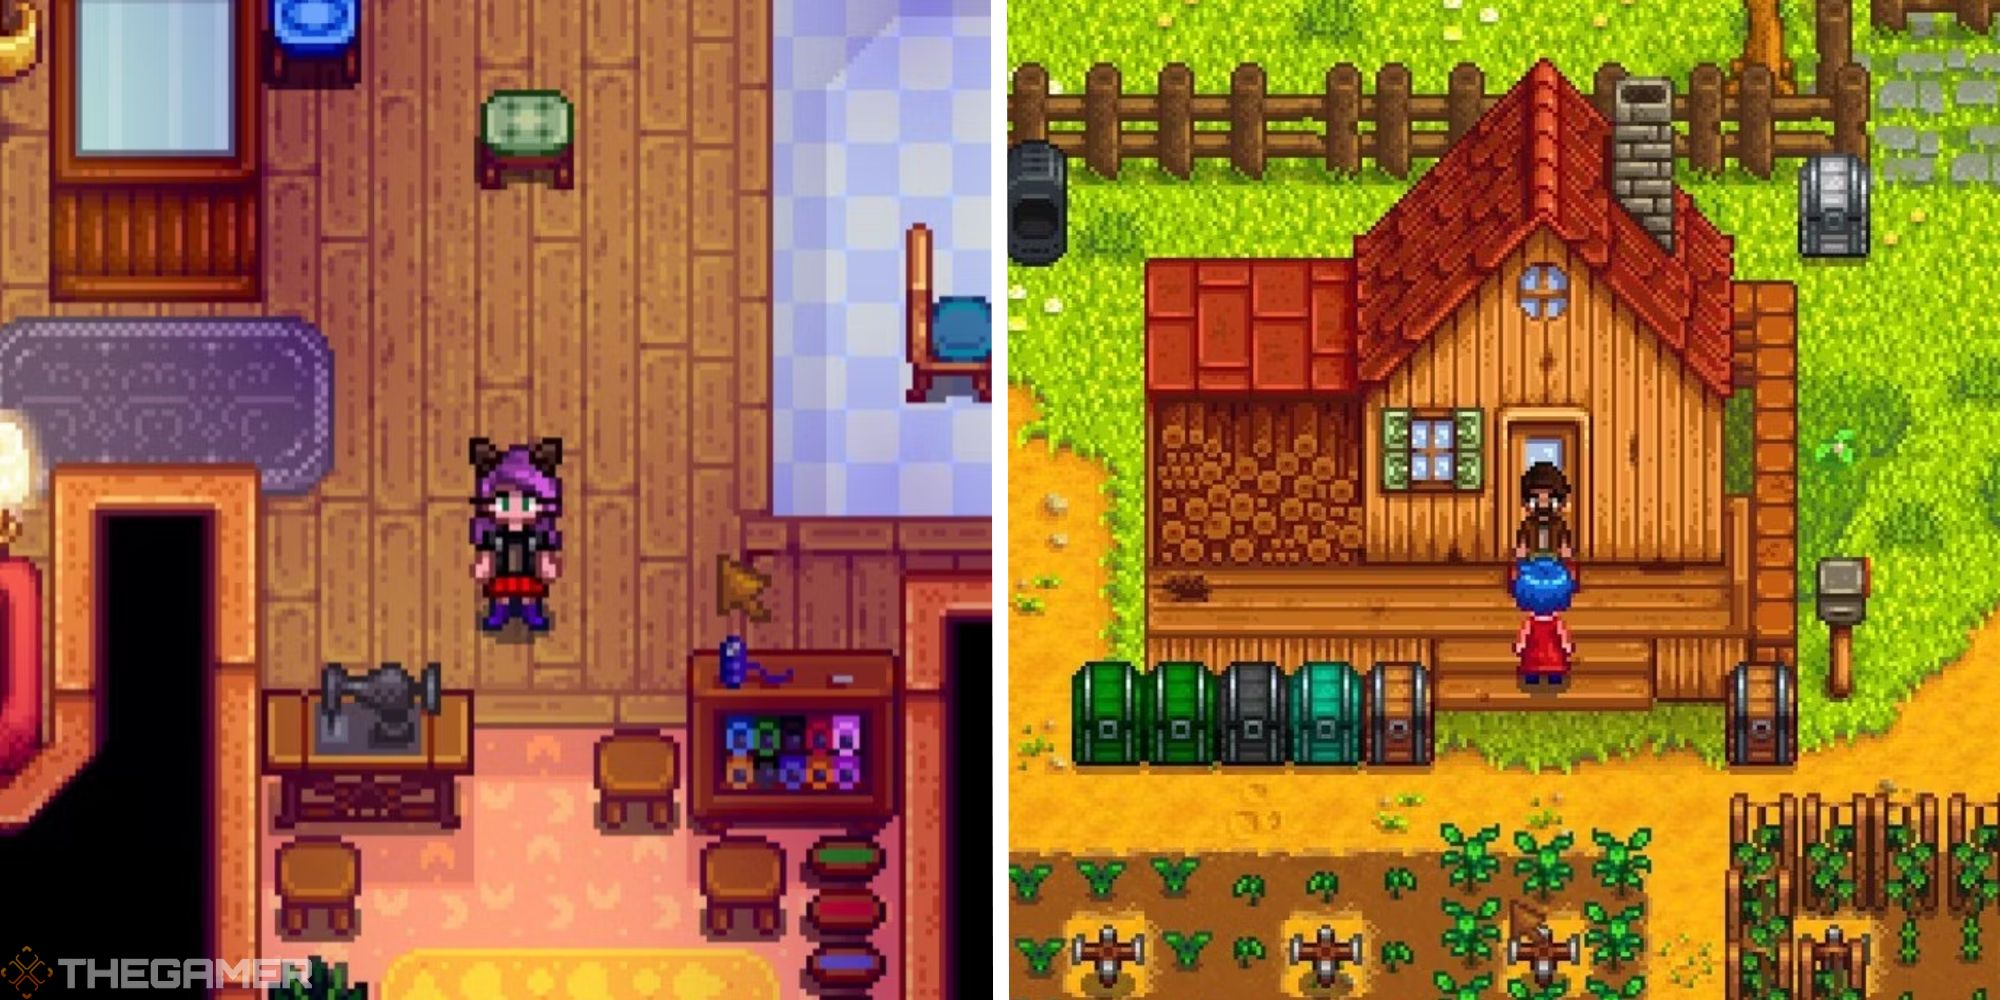 image of player near emilys sewing machine next to image of emily at players house